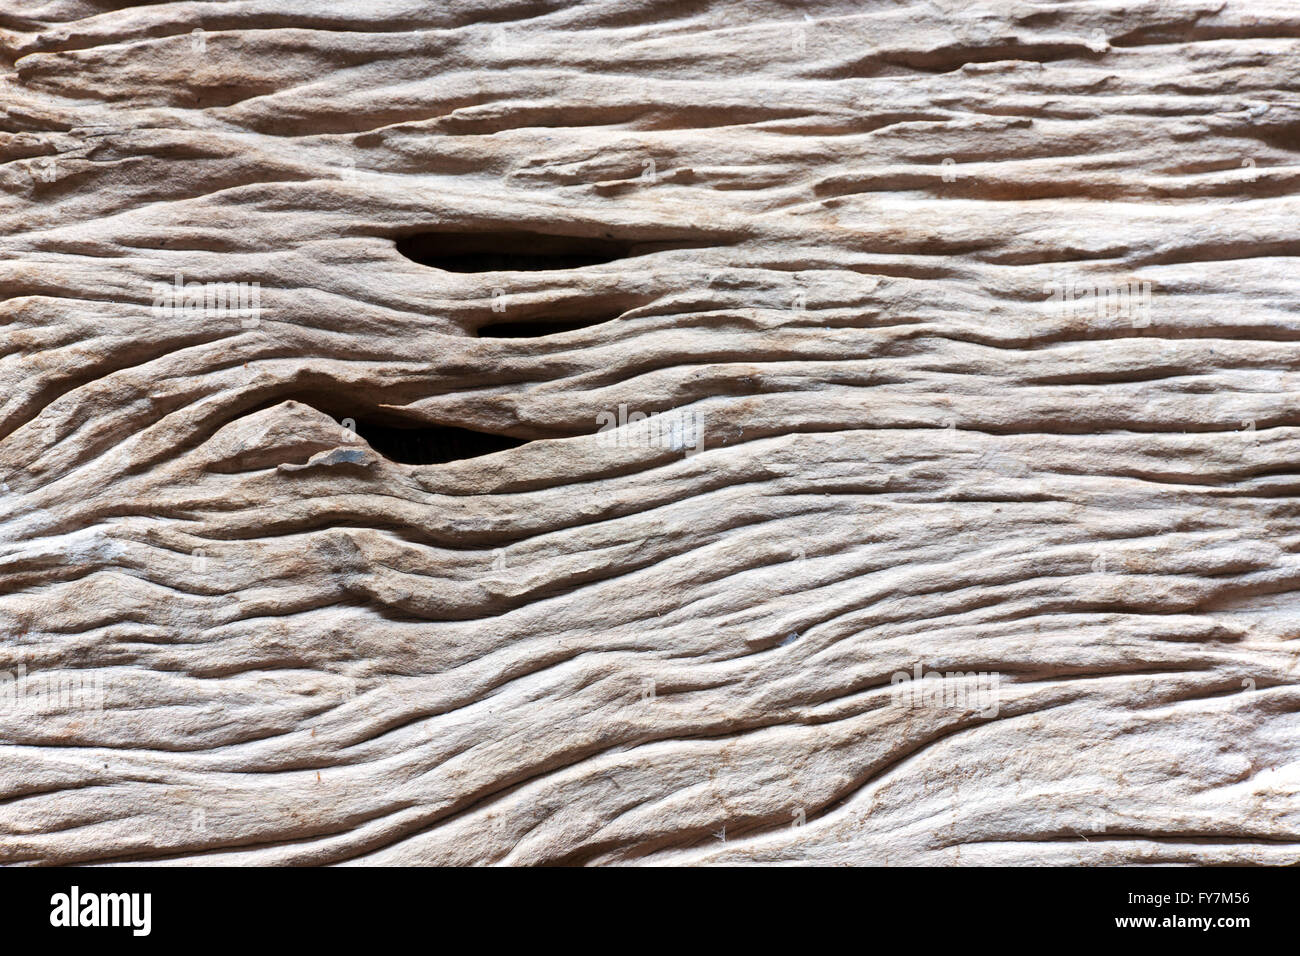 Rough natural wood. Corrosion show sub surface over time. Flat Lay Stock Photo